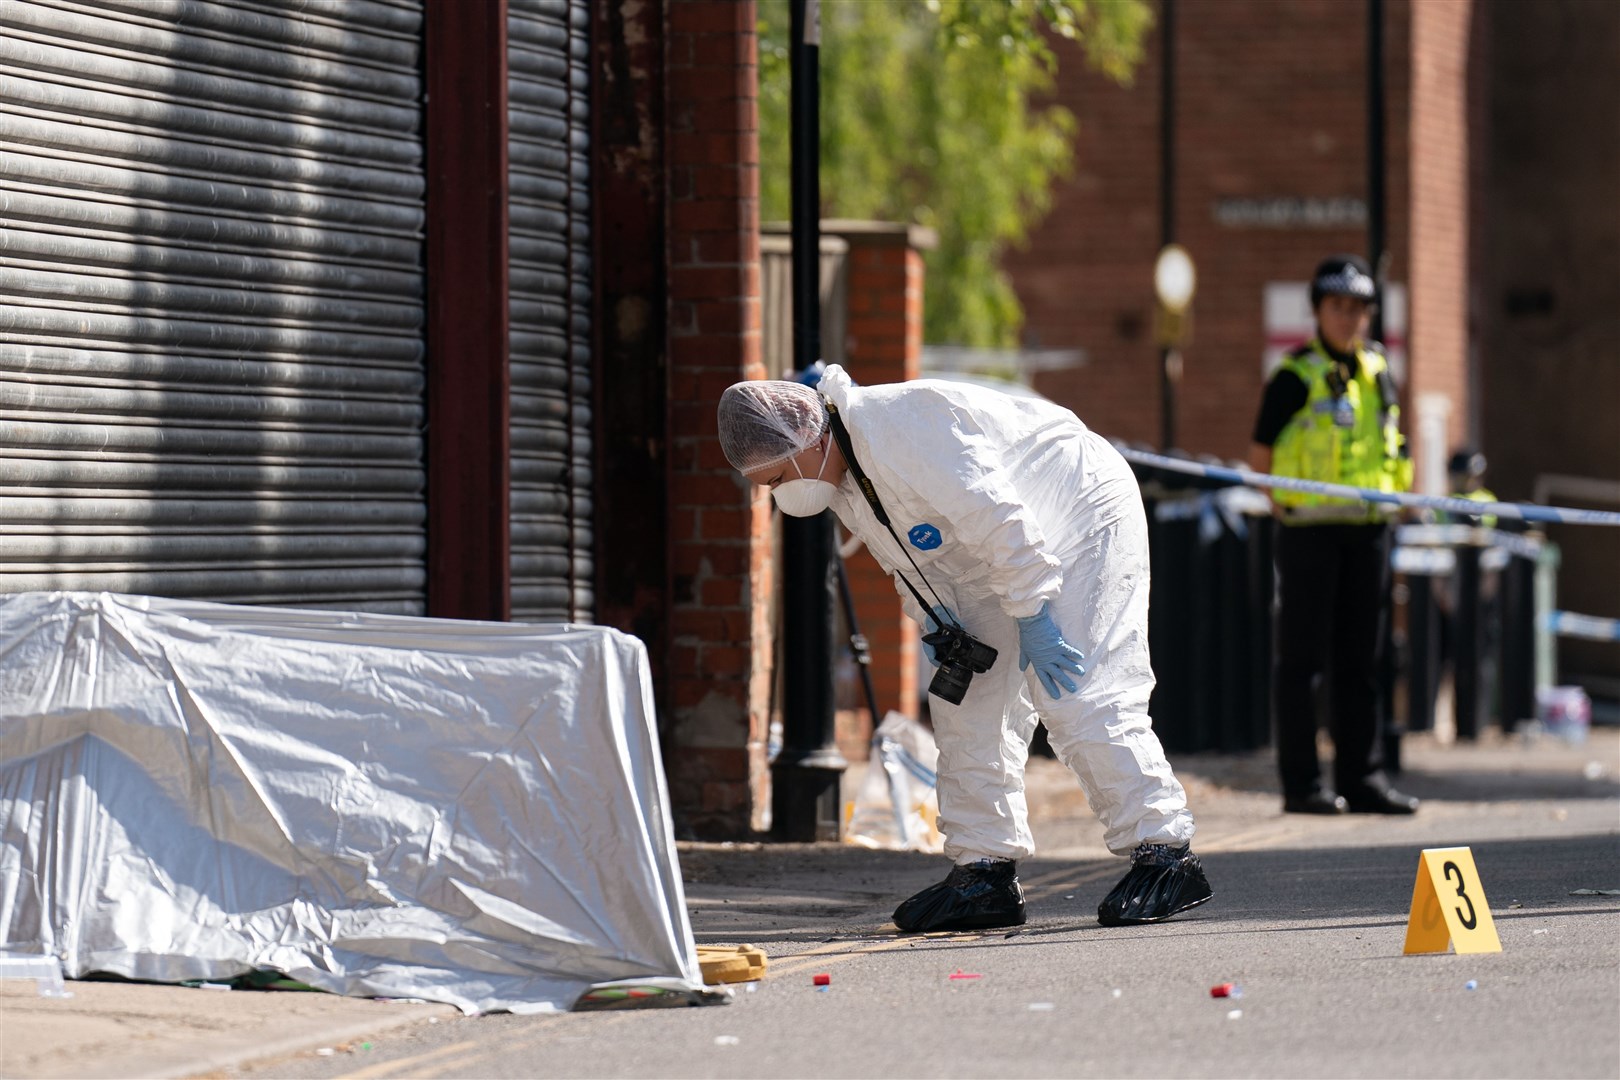 A forensic officer near the scene of the stabbing in Boston (Joe Giddens/PA)